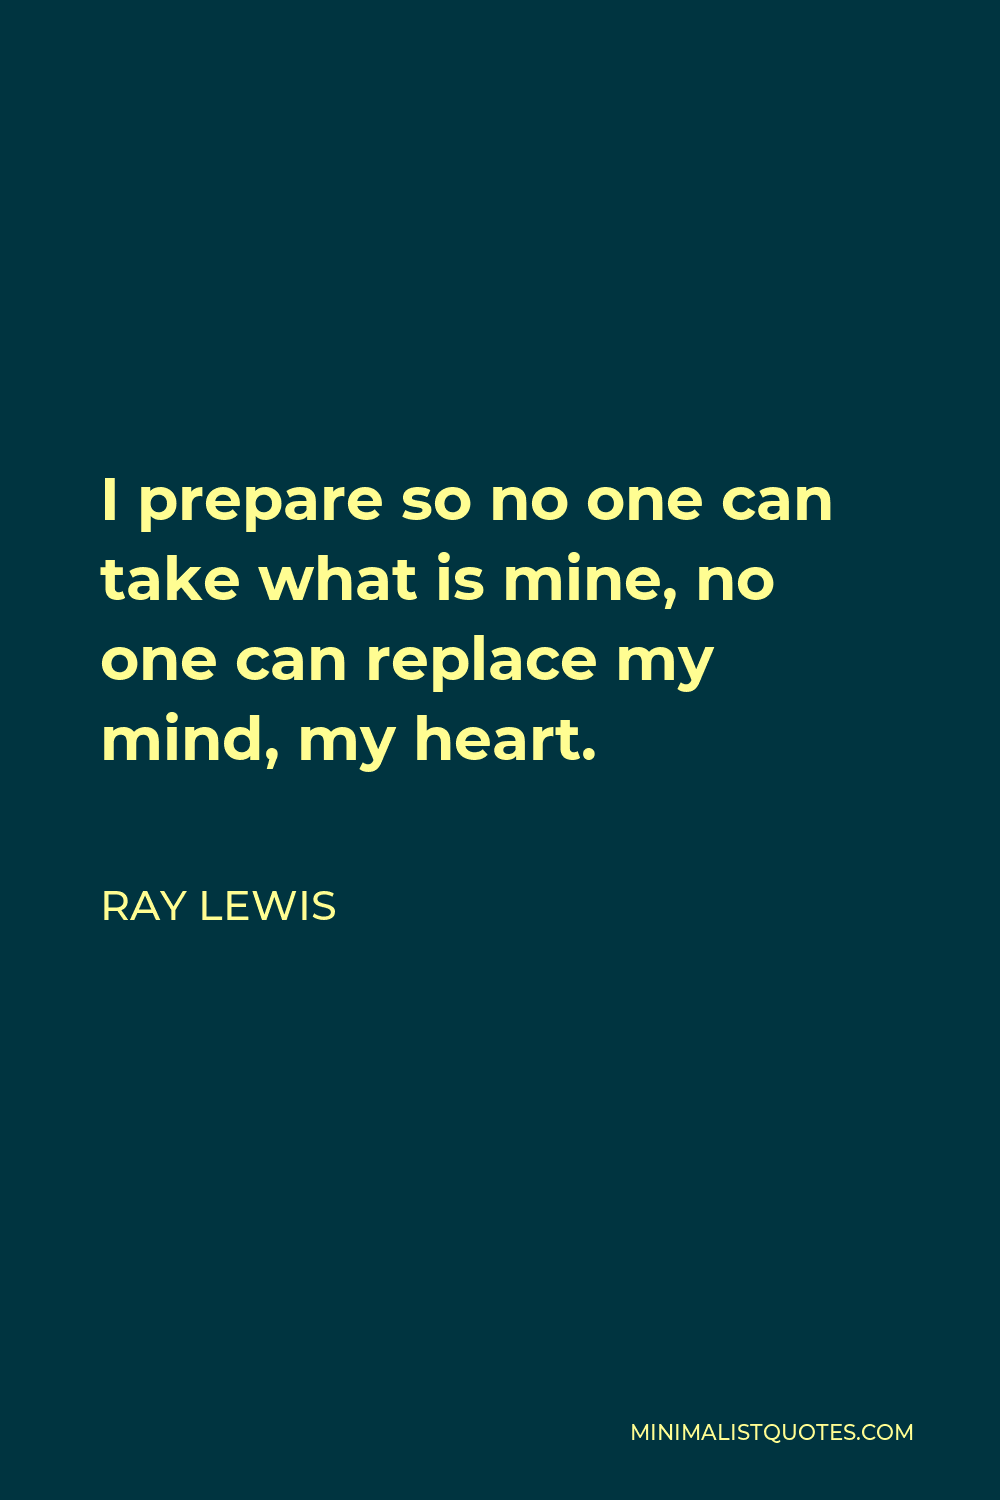 Ray Lewis Quote - I prepare so no one can take what is mine, no one can replace my mind, my heart.